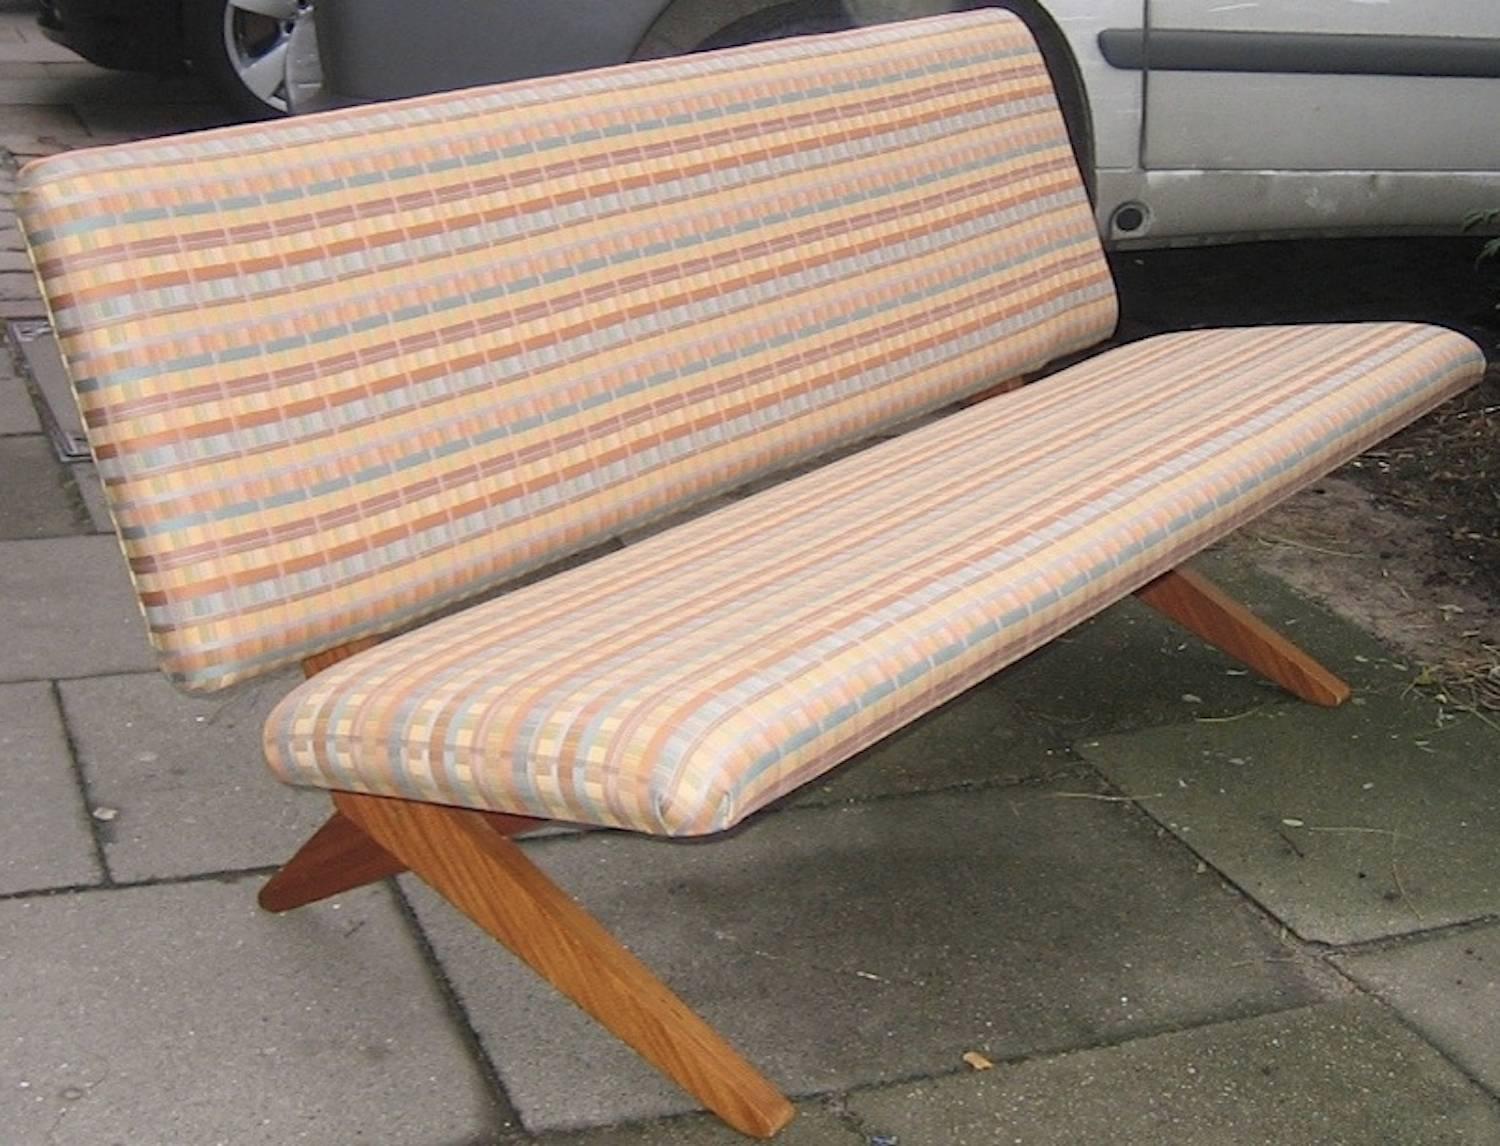 Settee designed and made by Pastoe, circa 1950. Unusual walnut version!

LOCATED IN HAMBURG